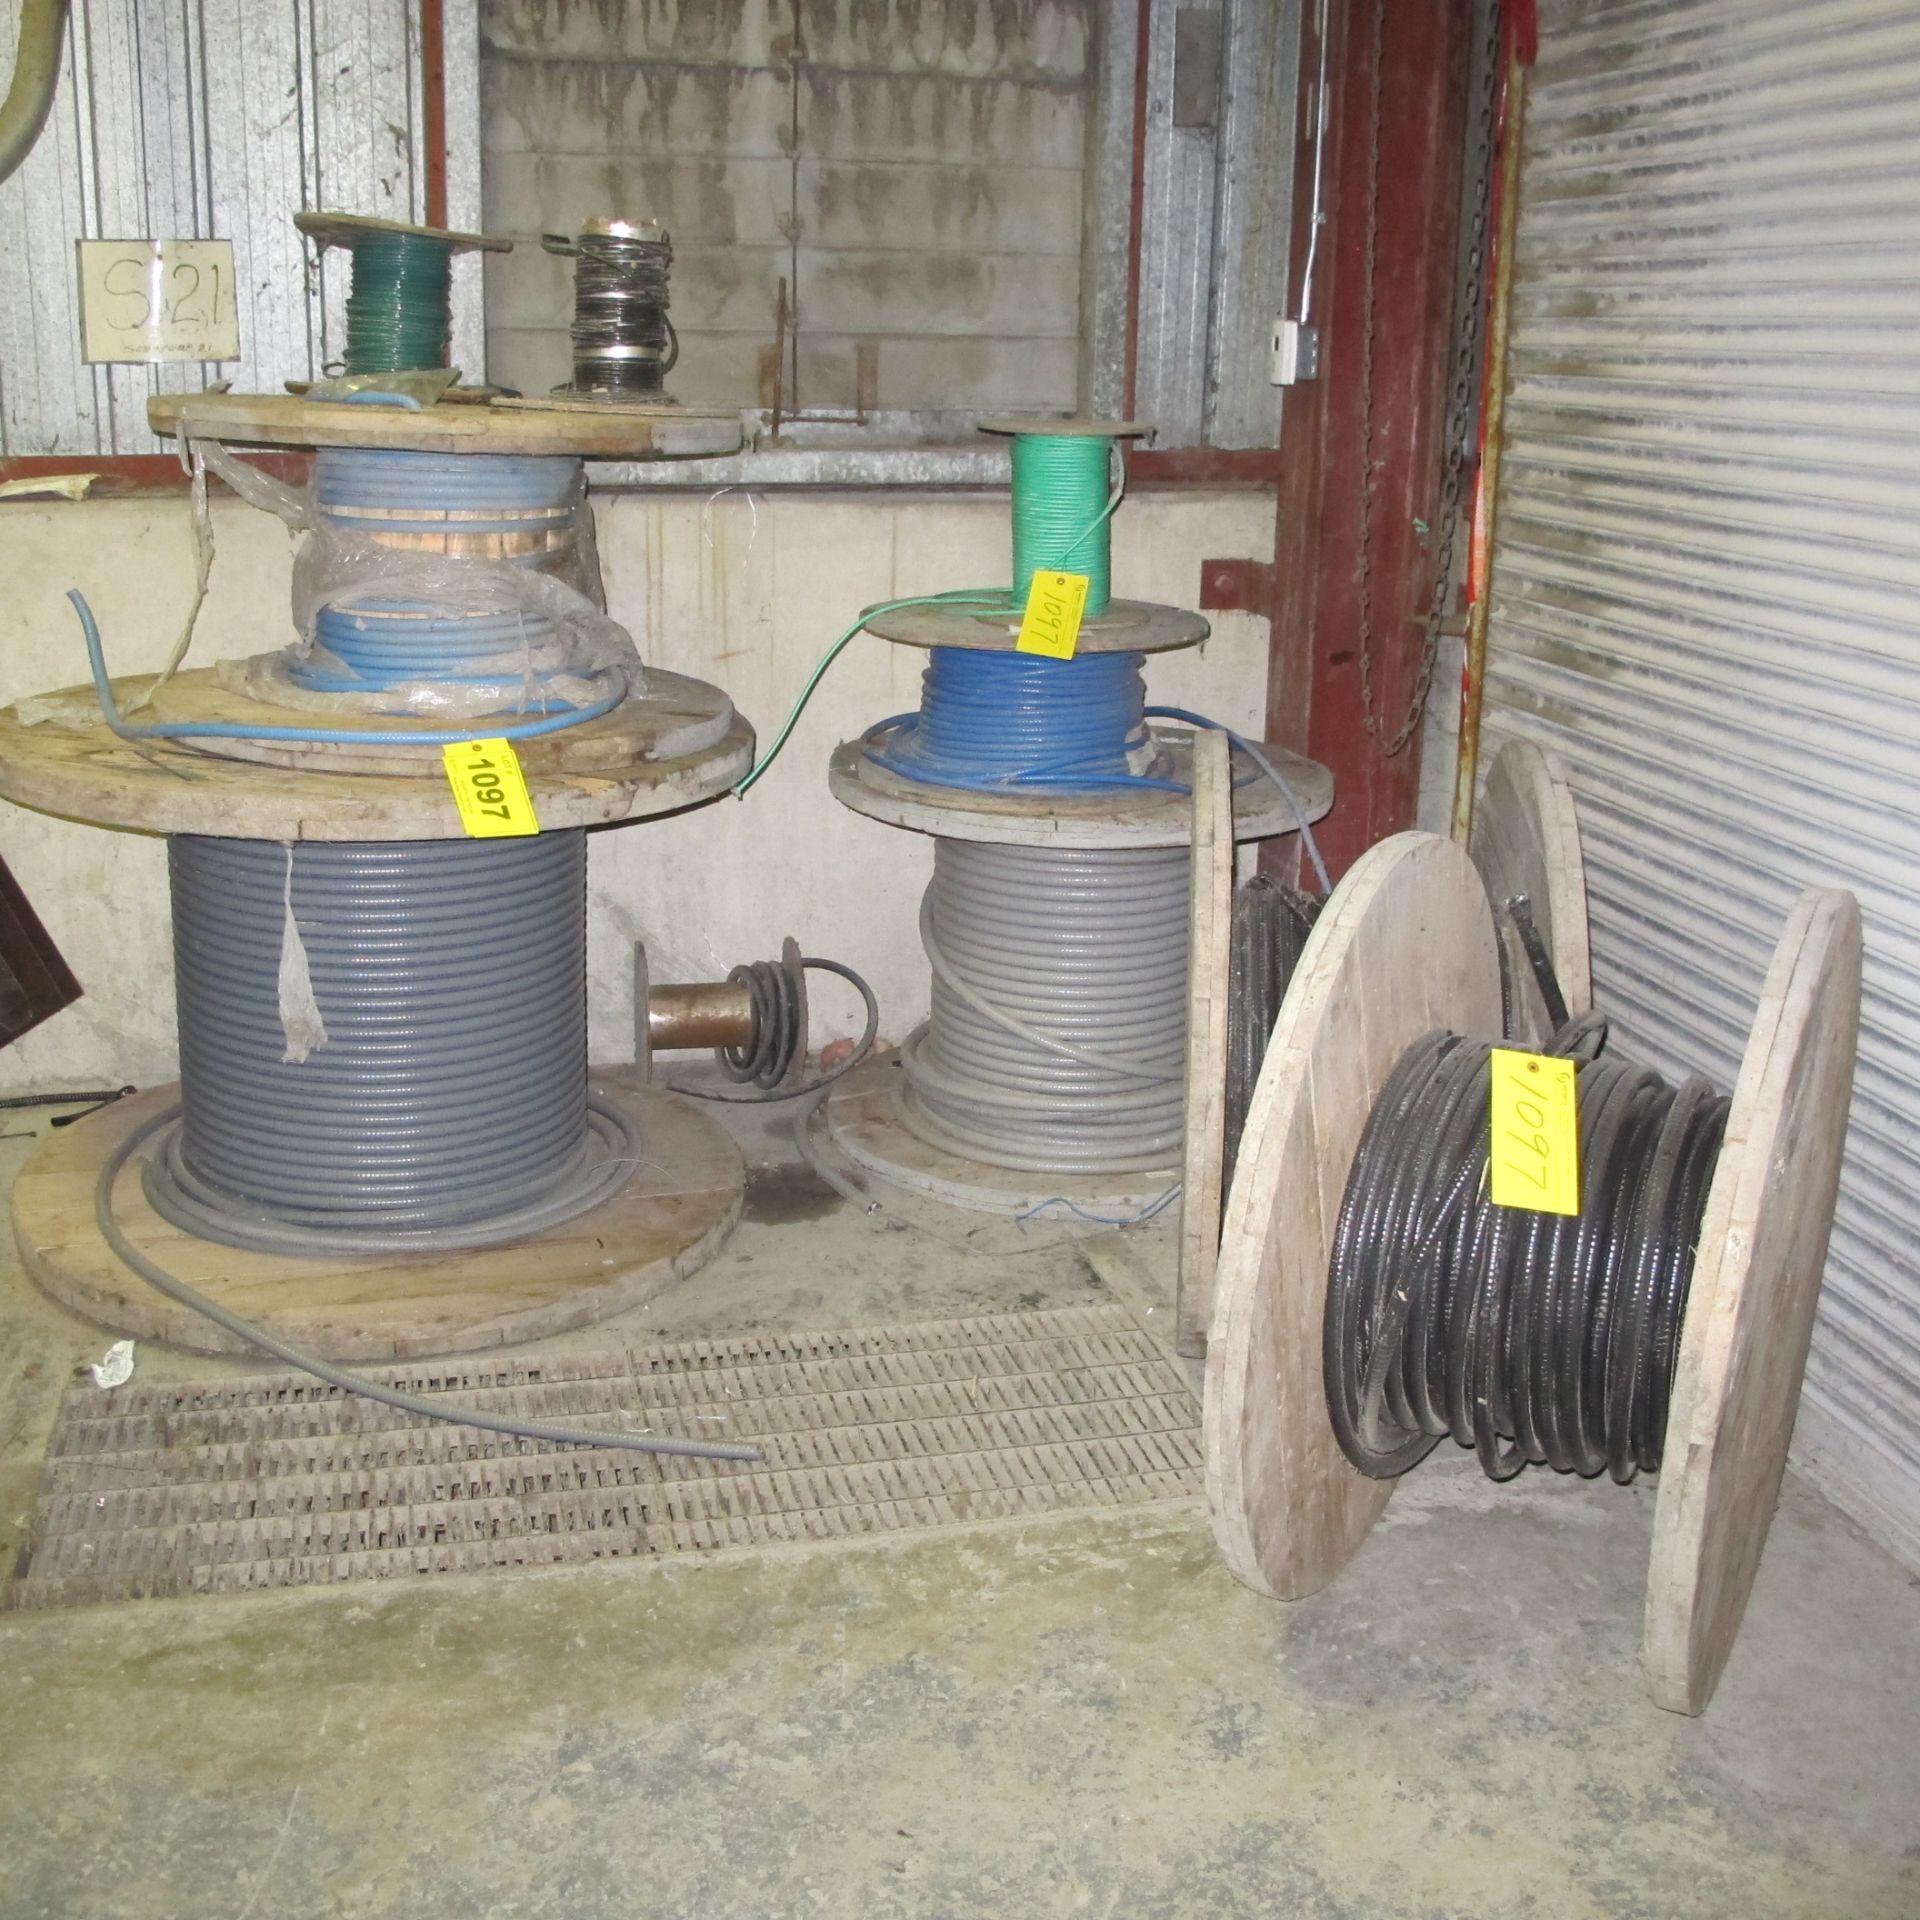 LOT (9) SPOOLS OF WIRE (WEST BUILDING, BASEMENT/GROUND FLOOR, PAPER MACHINER AREA, ELECTRICAL ROOM)